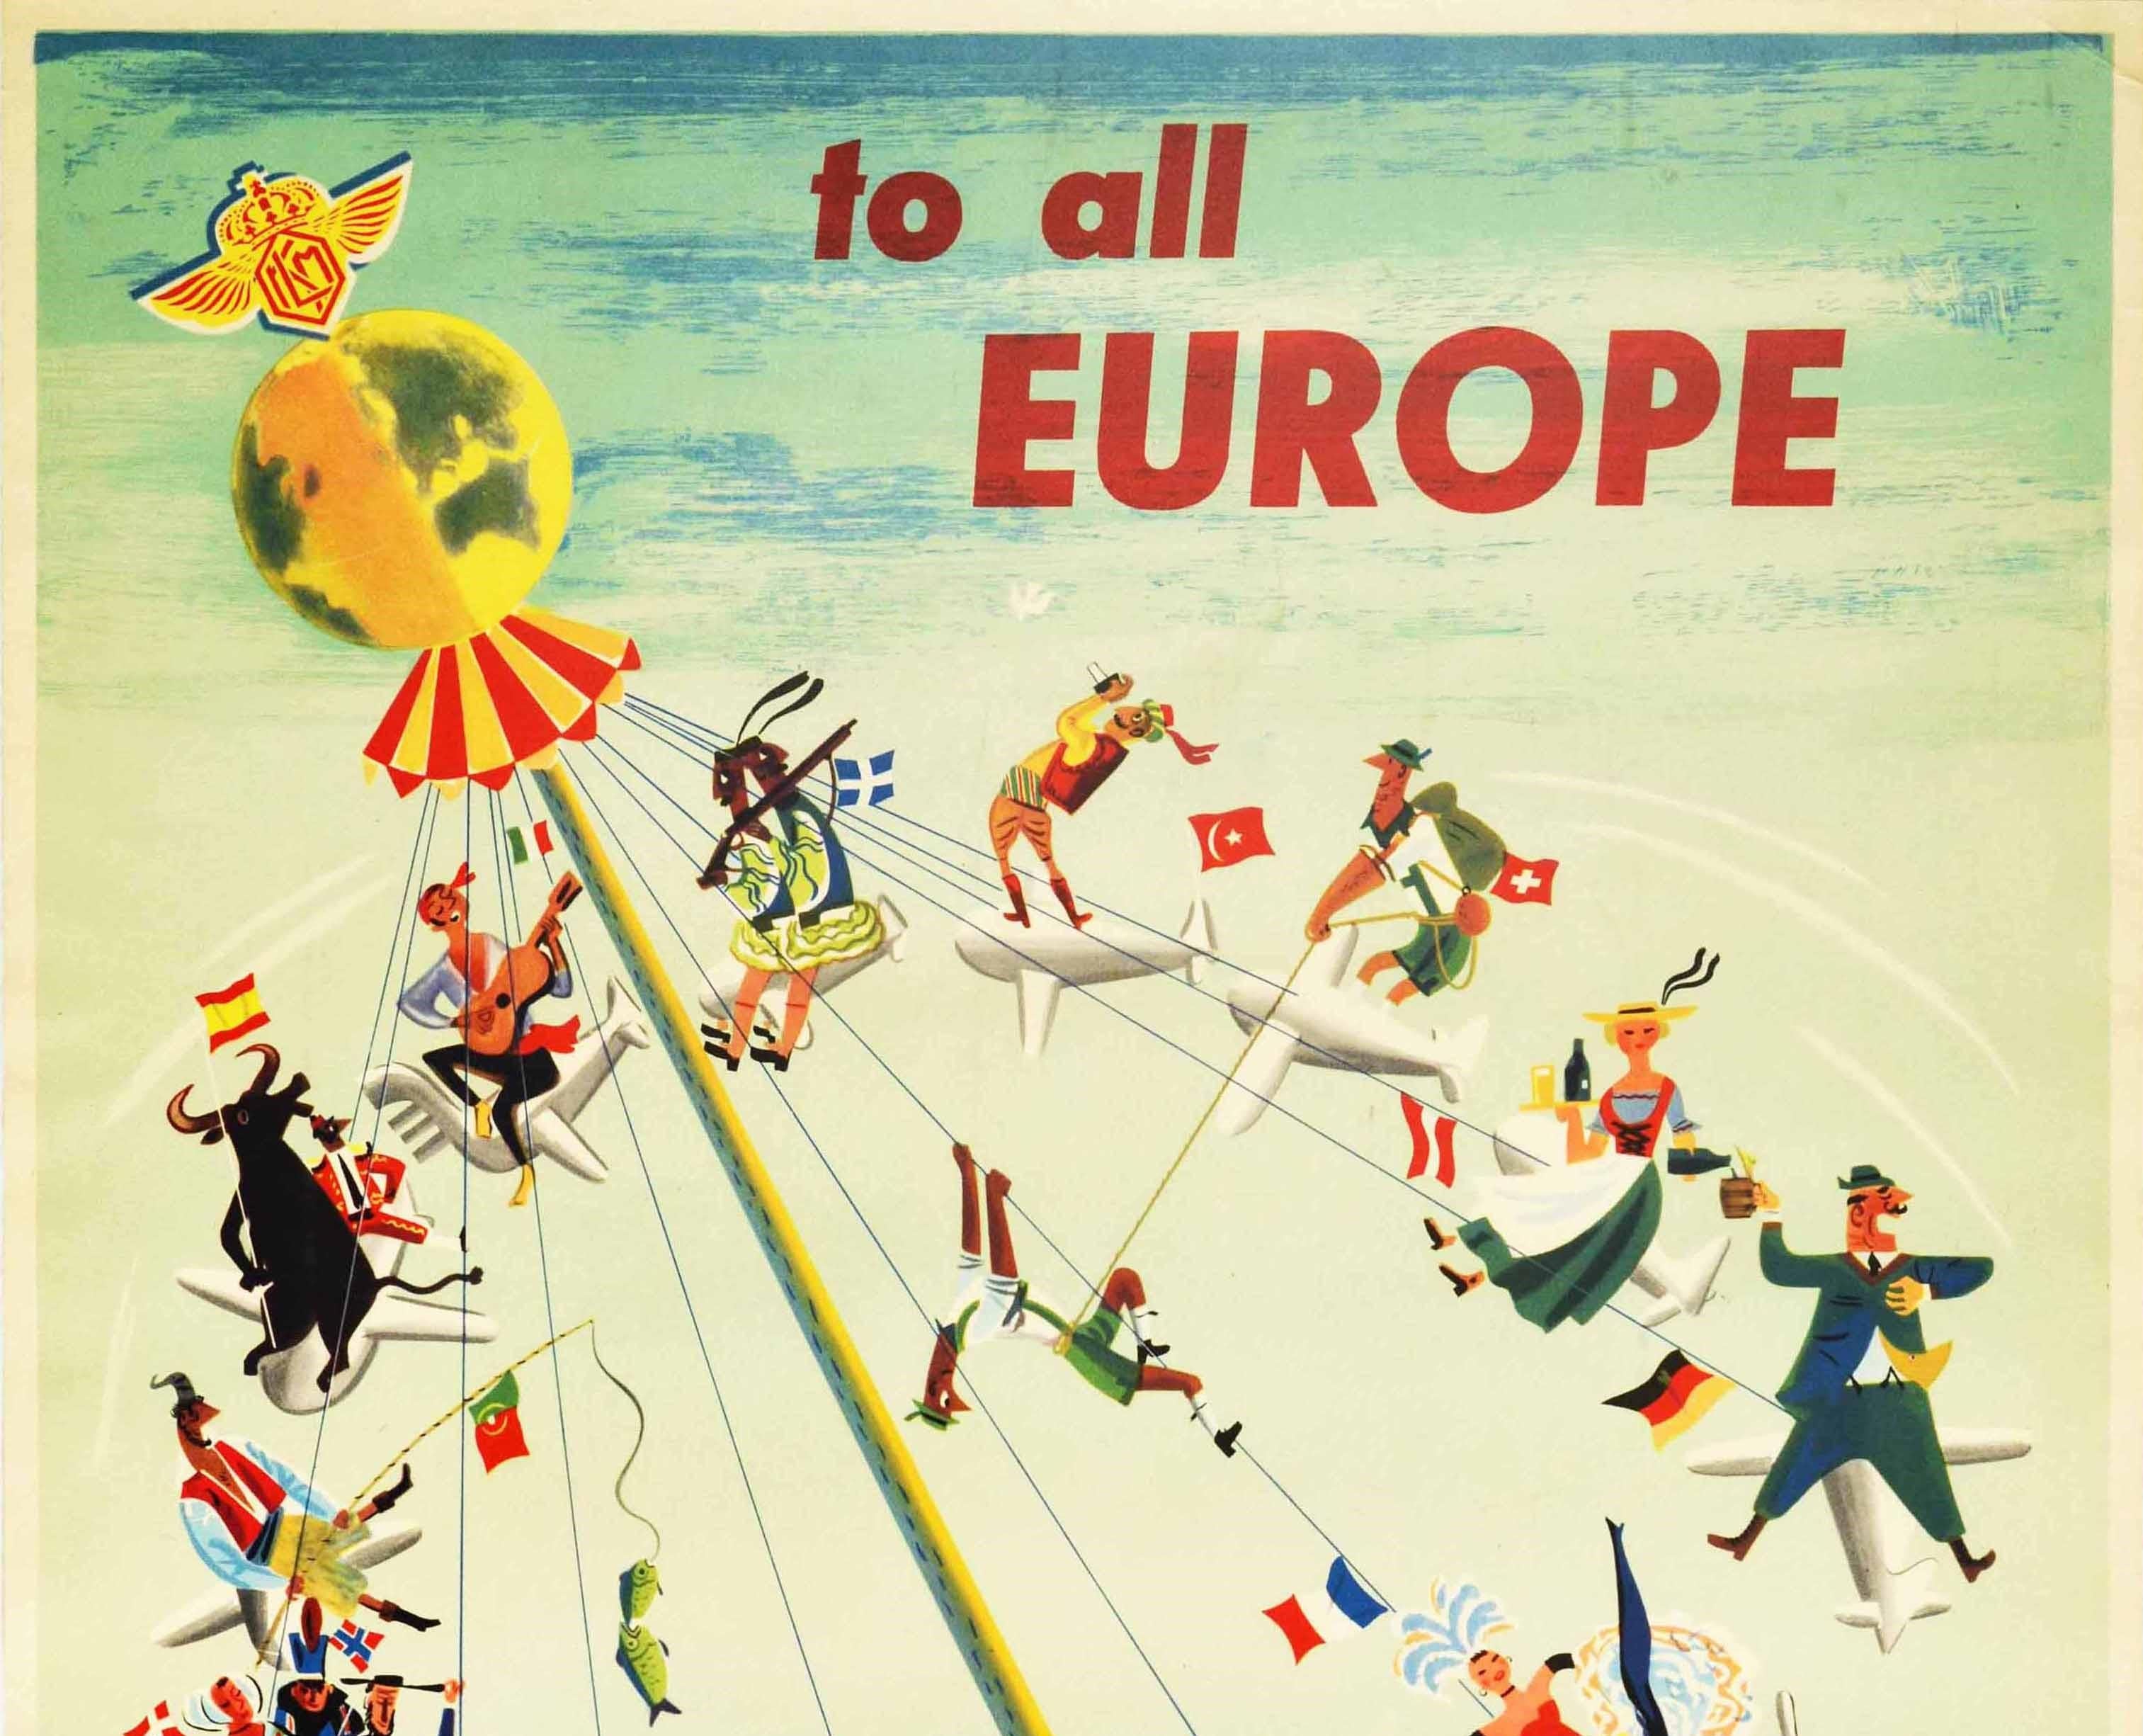 Original Vintage Airline Travel Poster To All Europe Fly KLM Carousel Swing Art - Print by Emile Brumsteede